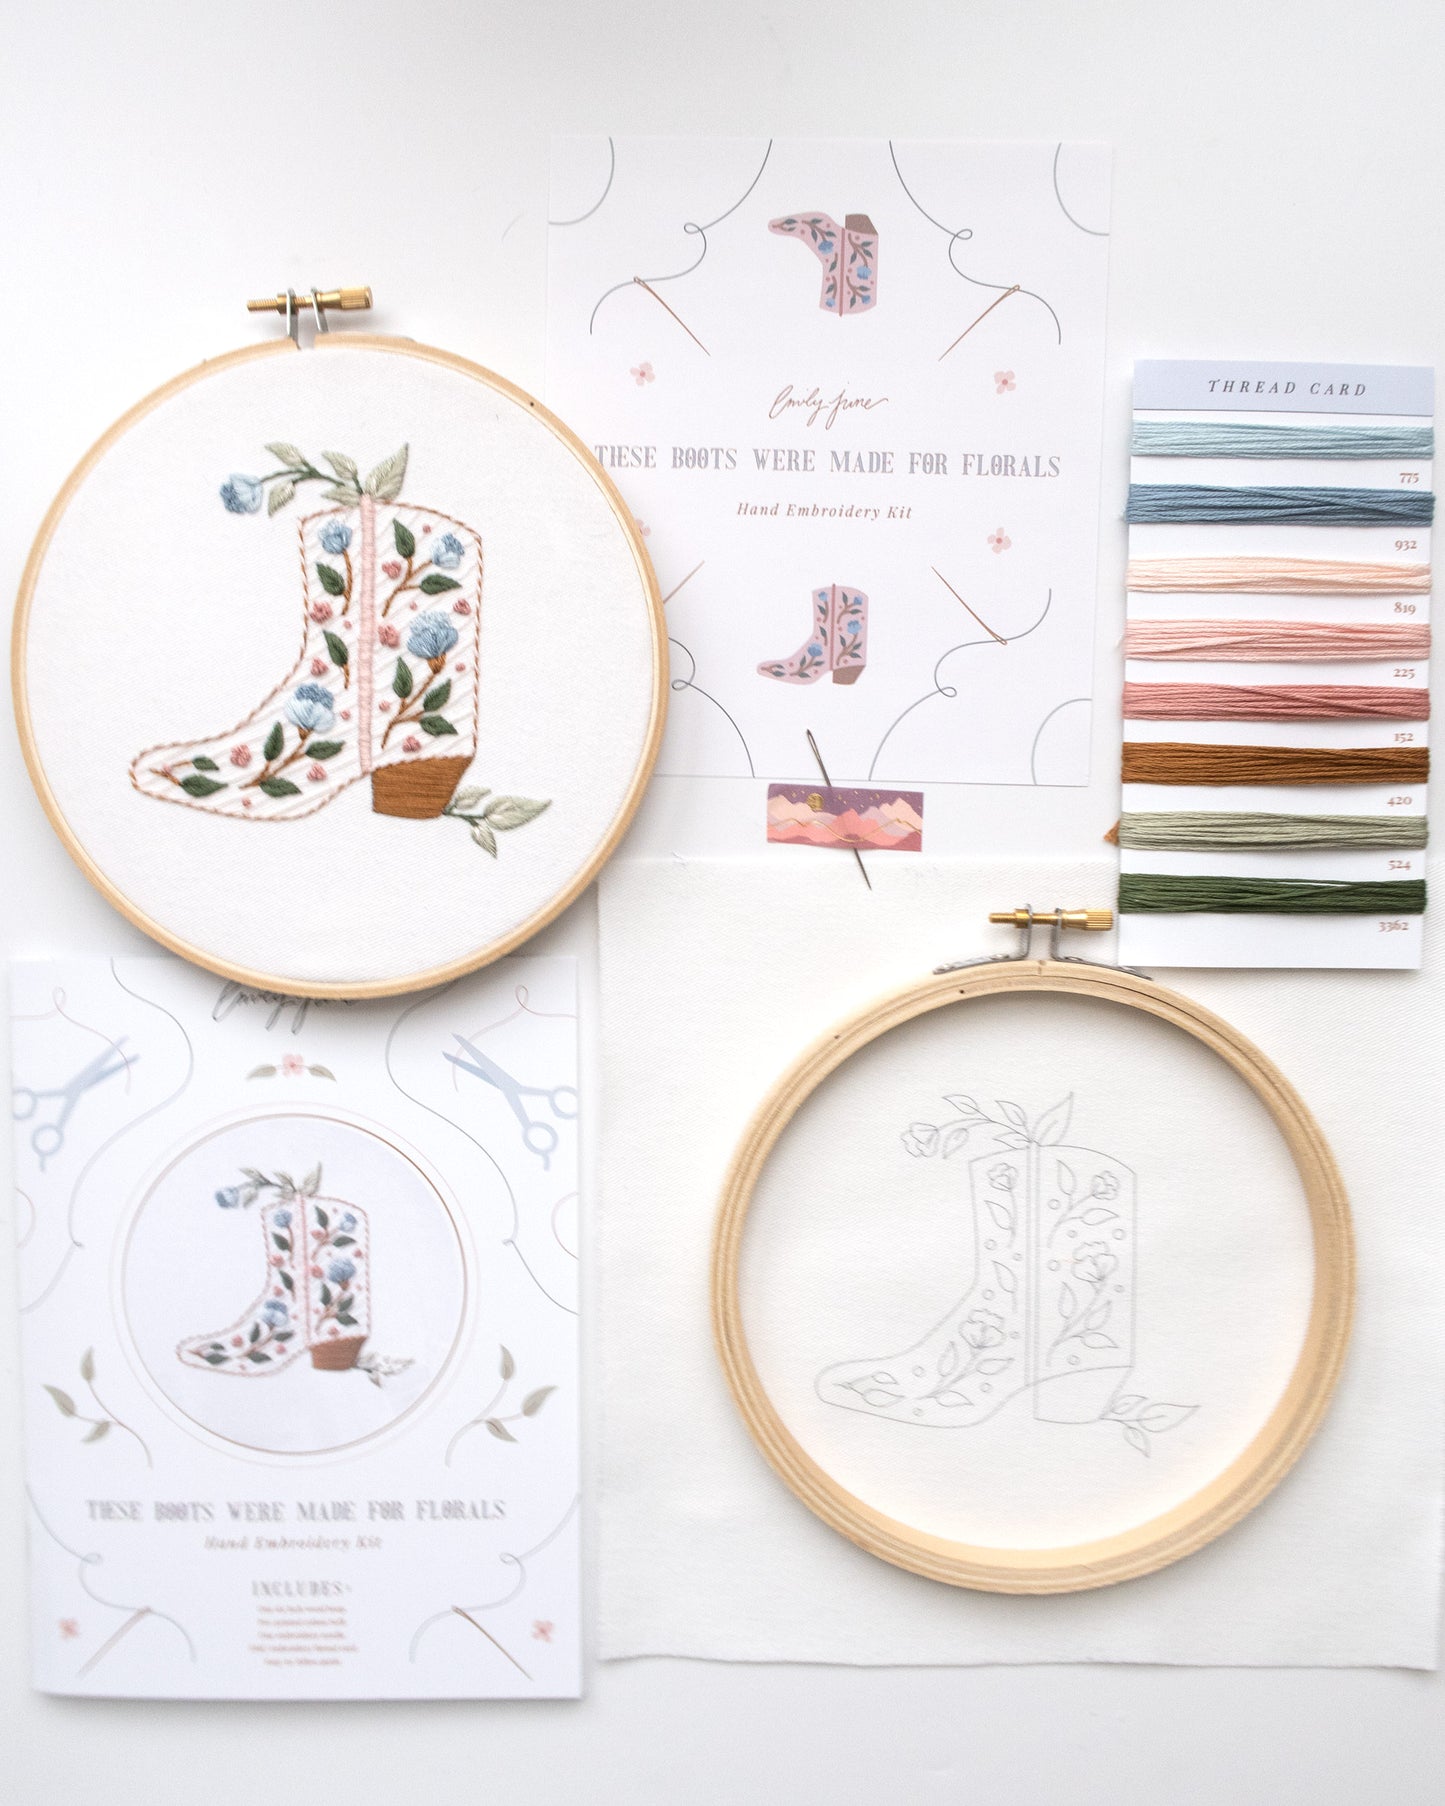 Southwest themed embroidery bundle with embroidery kit that includes wood embroidery hoop, printed embroidery fabric, embroidery needle, embroidery floss, and embroidery guide